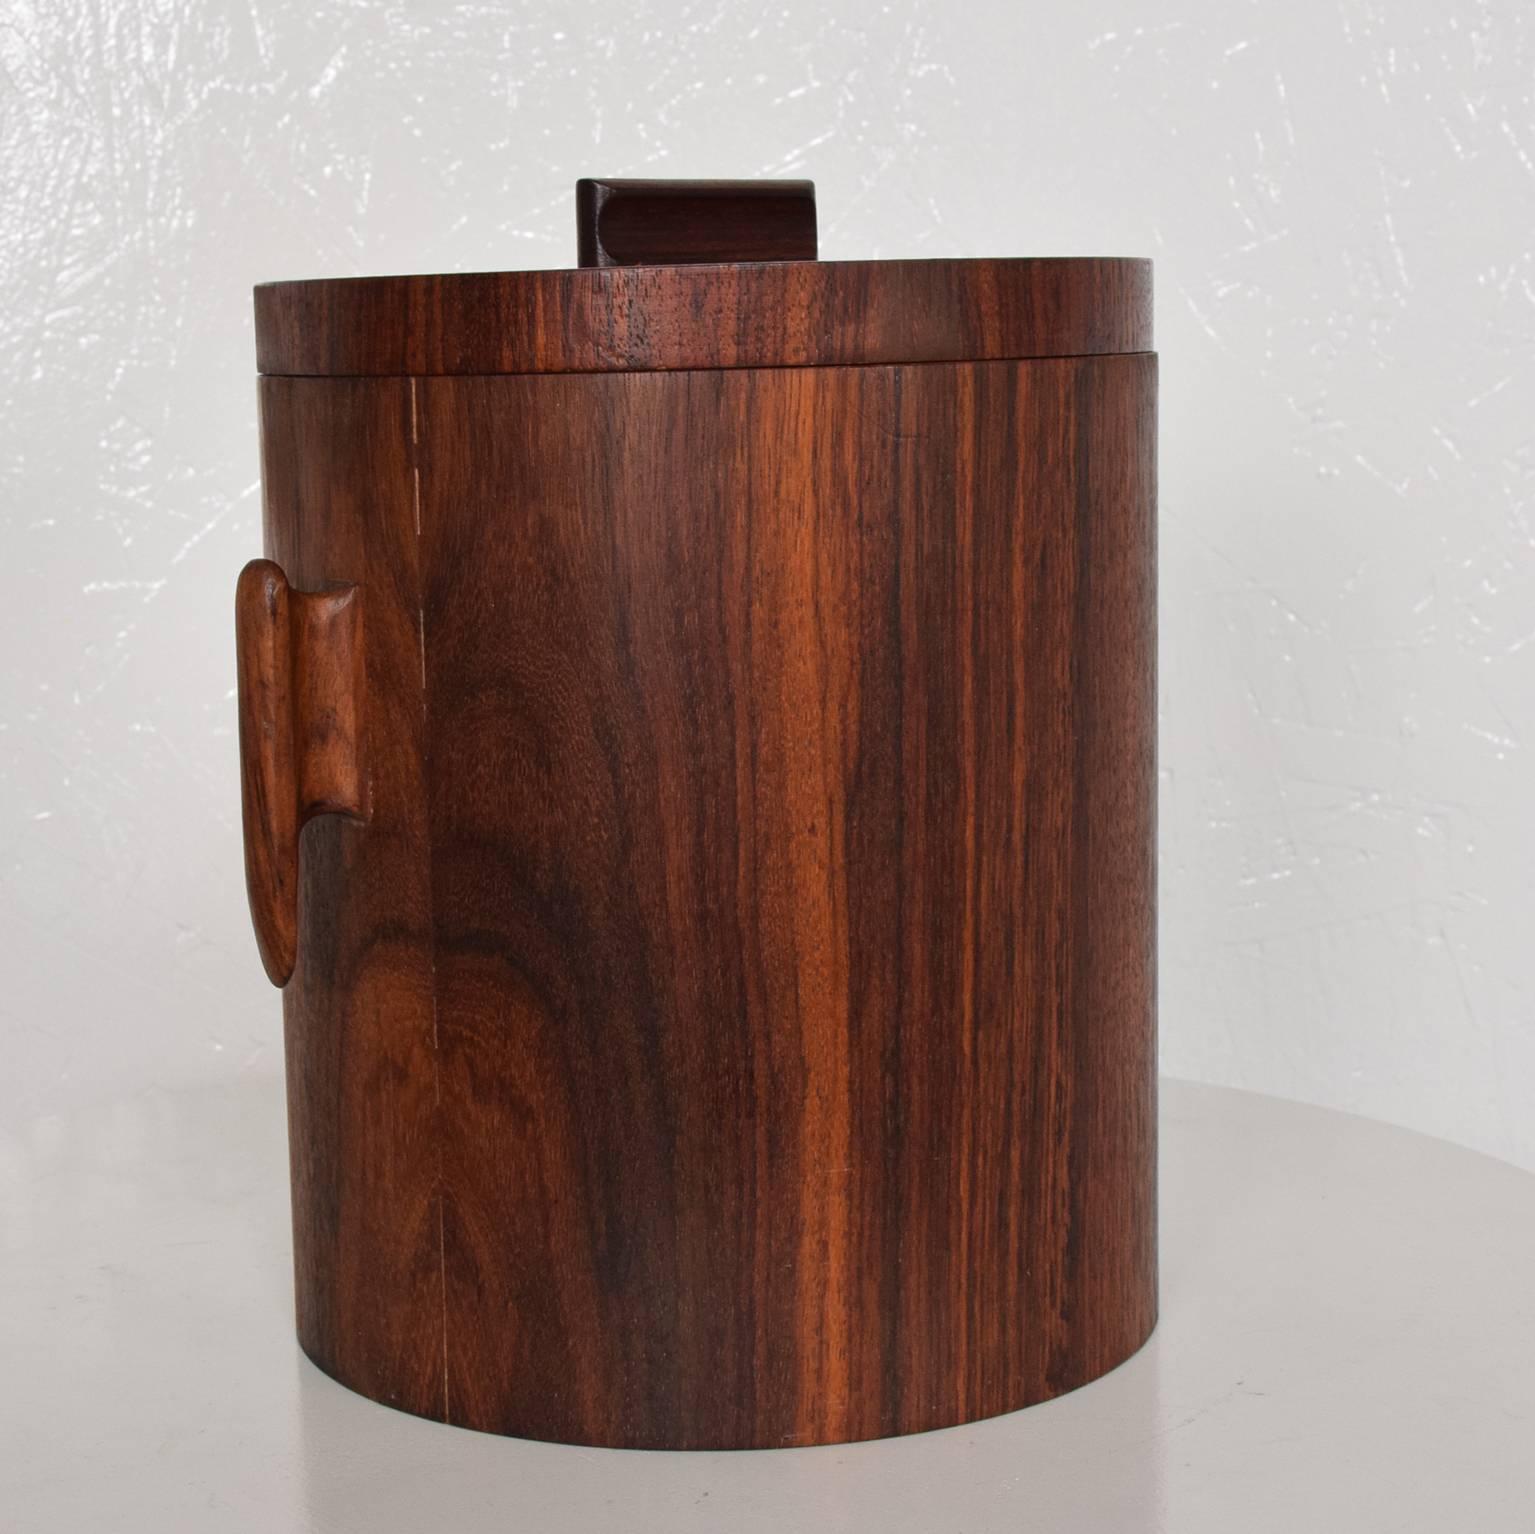 For your consideration, Mid-Century Modern rosewood ice bucket, in the style of Jean Gillon.

Dimensions: 9 1/2